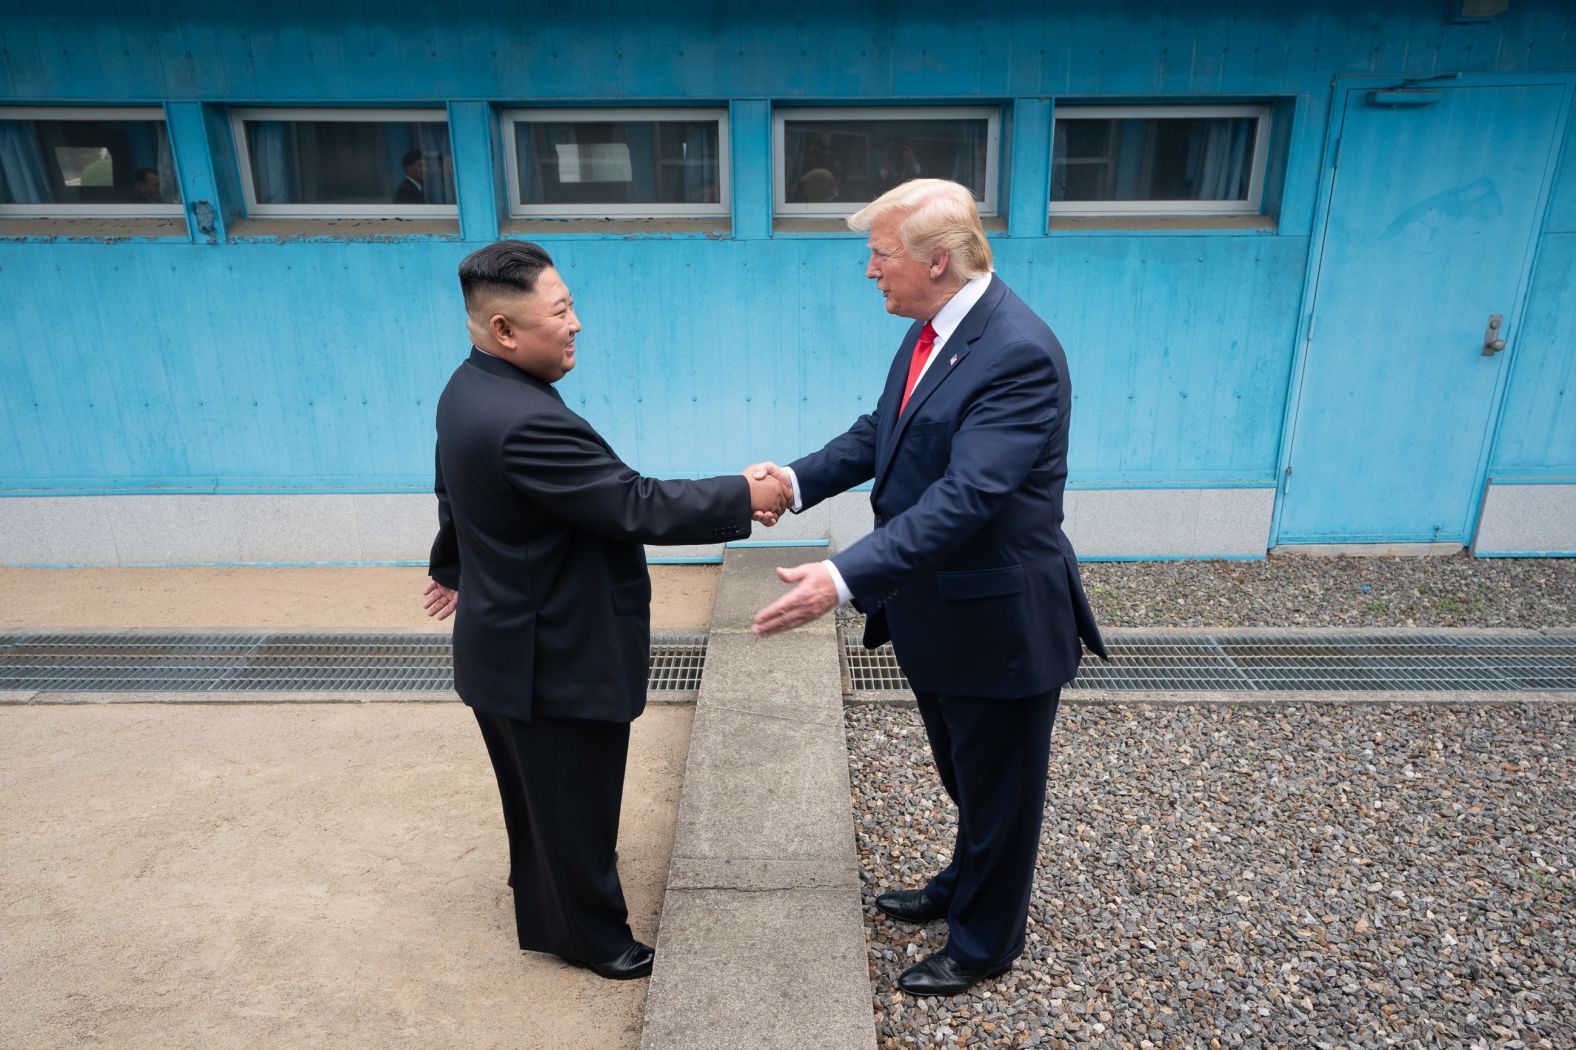 Trump shakes hands with North Korean leader Kim Jong Un as the two <a href="index.php?page=&url=https%3A%2F%2Fwww.cnn.com%2F2019%2F06%2F30%2Fworld%2Fgallery%2Ftrump-kim-north-korea%2Findex.html" target="_blank">meet at the Korean Demilitarized Zone</a> in June 2019. Trump briefly stepped over into North Korean territory, becoming the first sitting US leader to set foot in the nation. Trump said he invited Kim to the White House, and both leaders agreed to restart talks after nuclear negotiations stalled.